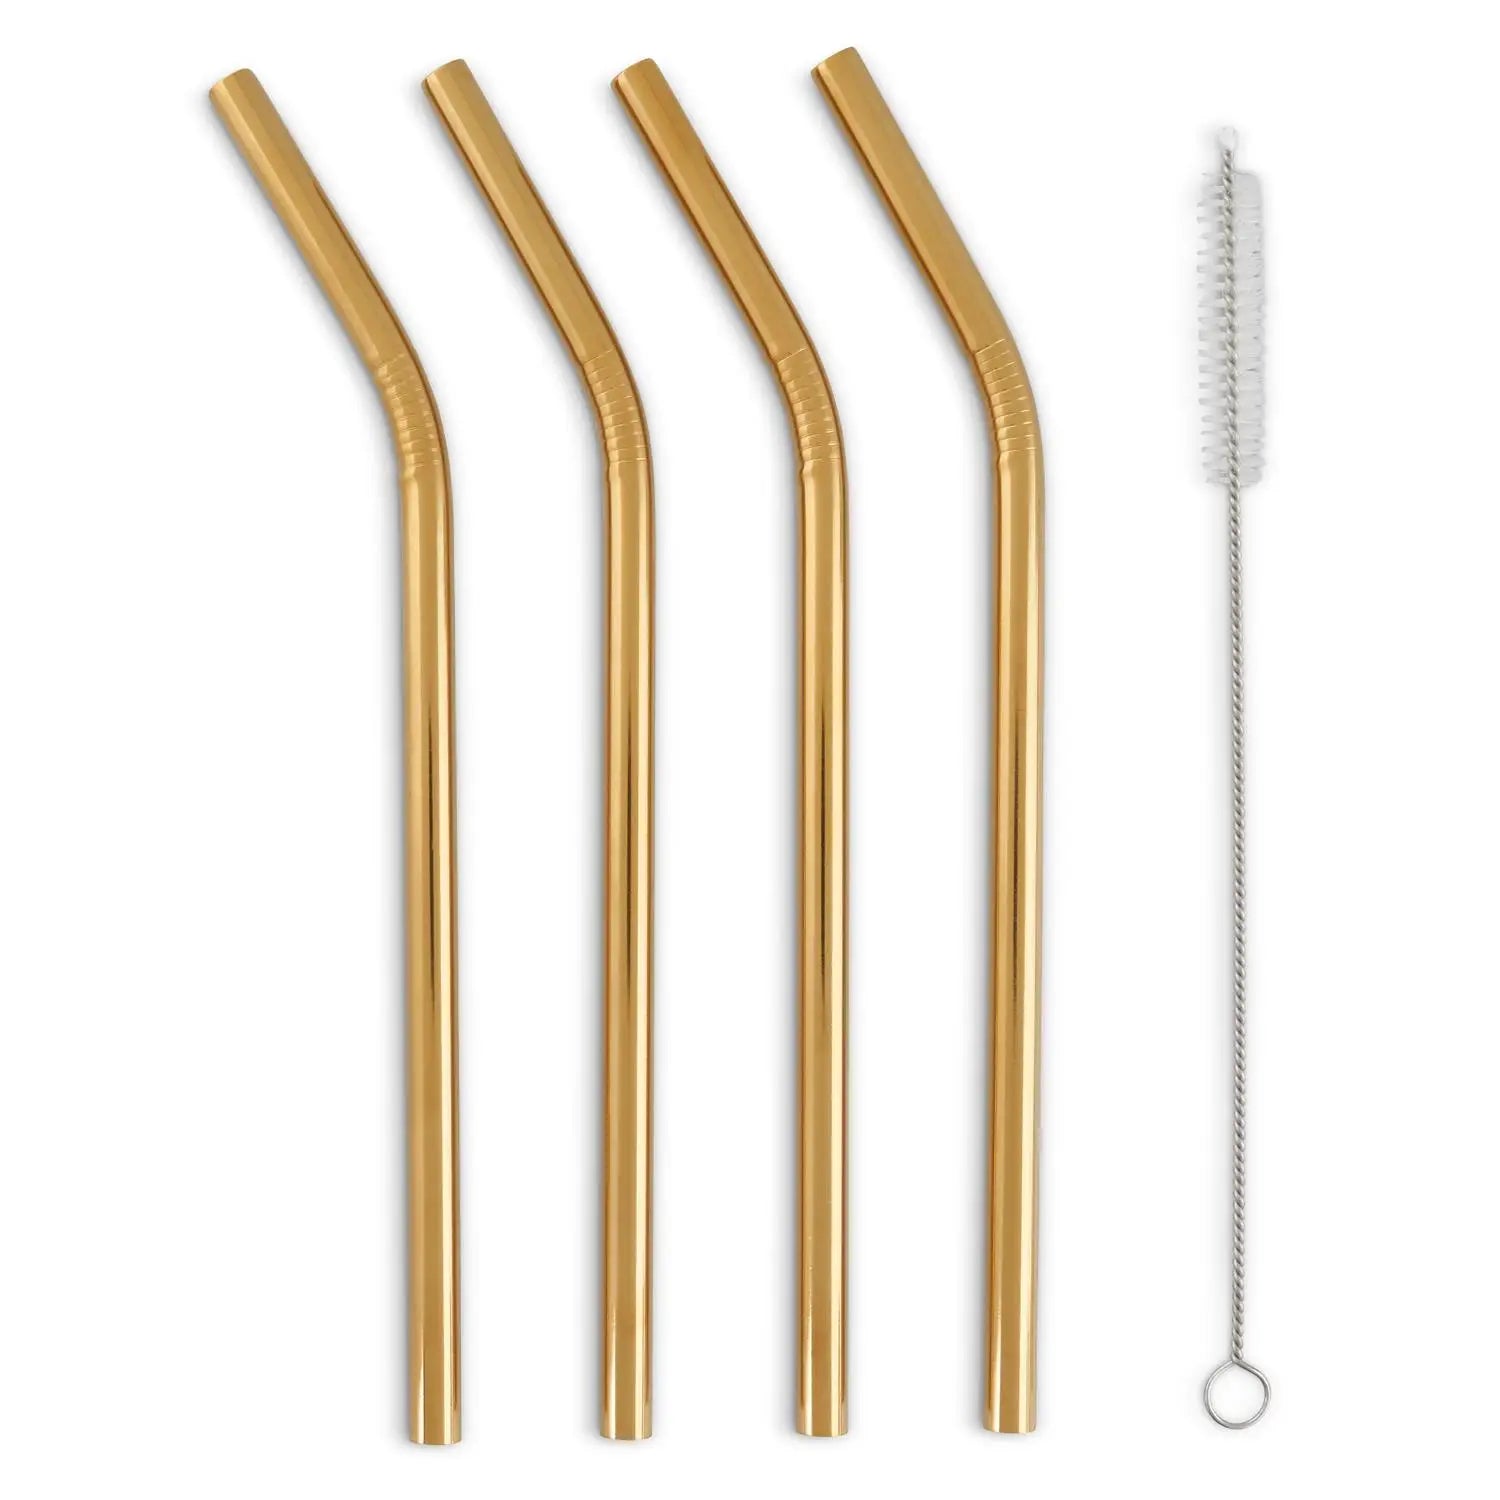 Reusable Gold Stainless Steel Metal Straws by UBERSTAR. Reusable gold metal straws. Metal straw for smoothies. Metal straws for cocktails